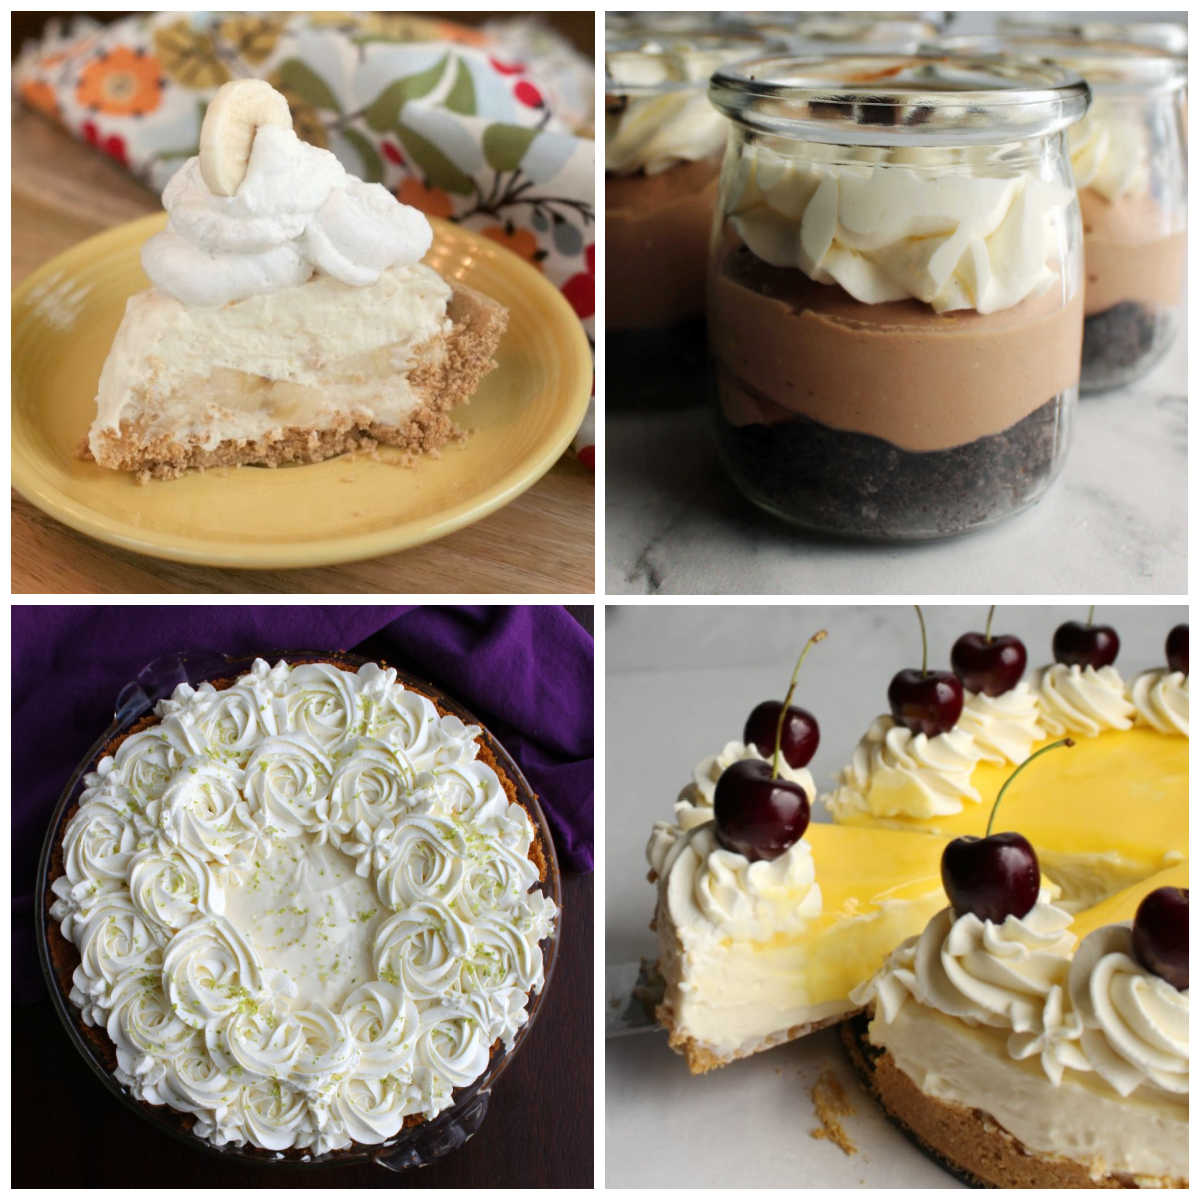 Collage of no bake desserts including key lime pie, lemon cheesecake, banana cream pie and chocolate cheesecake.